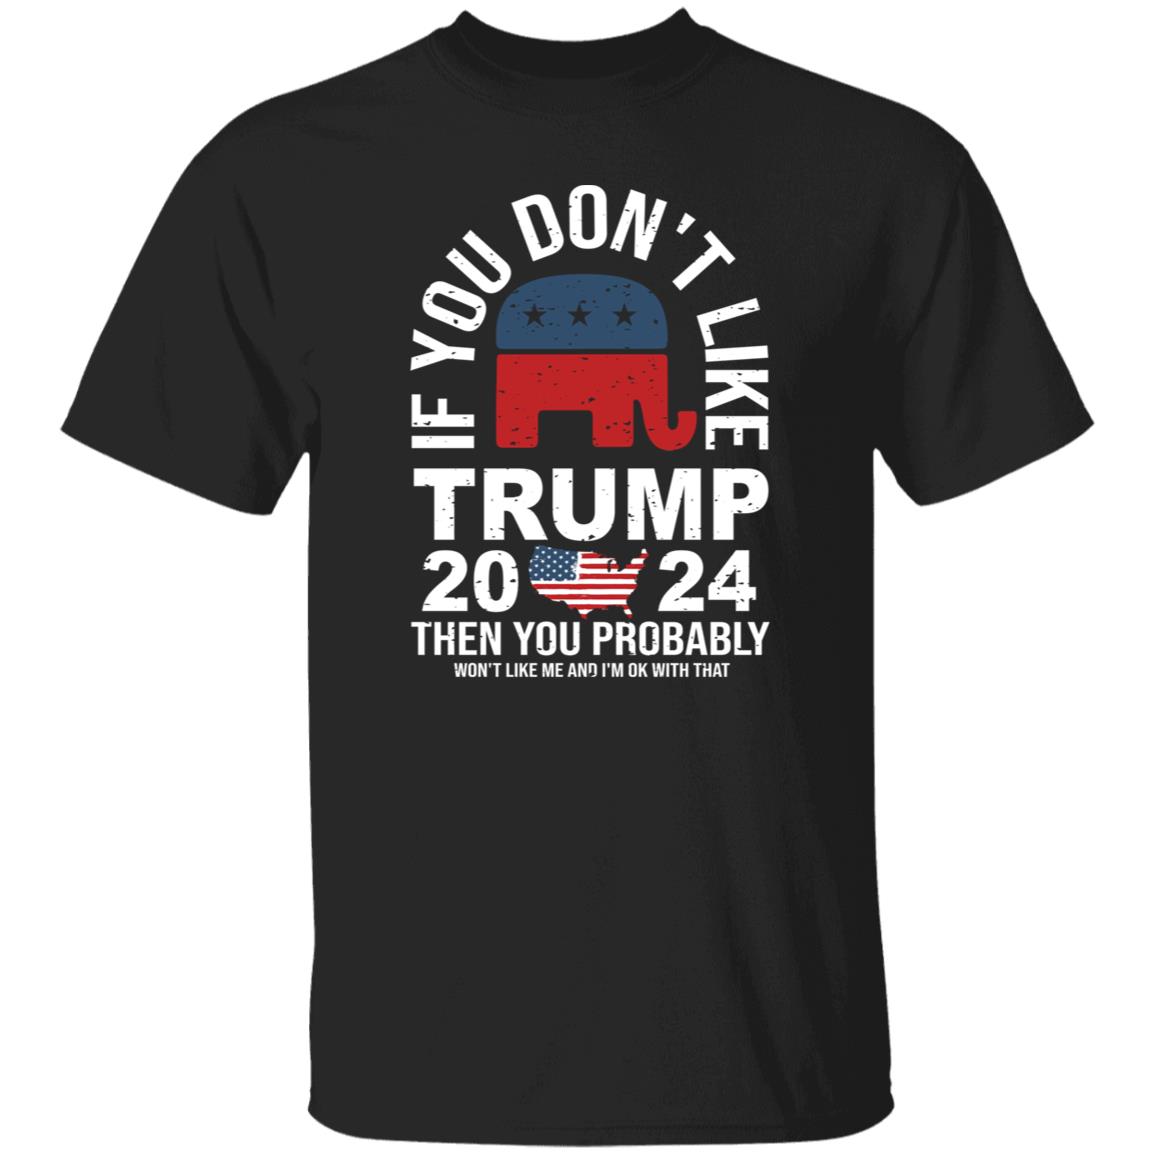 If You Don't Like Trump You Probably Won't Like Me 2024 Shirt